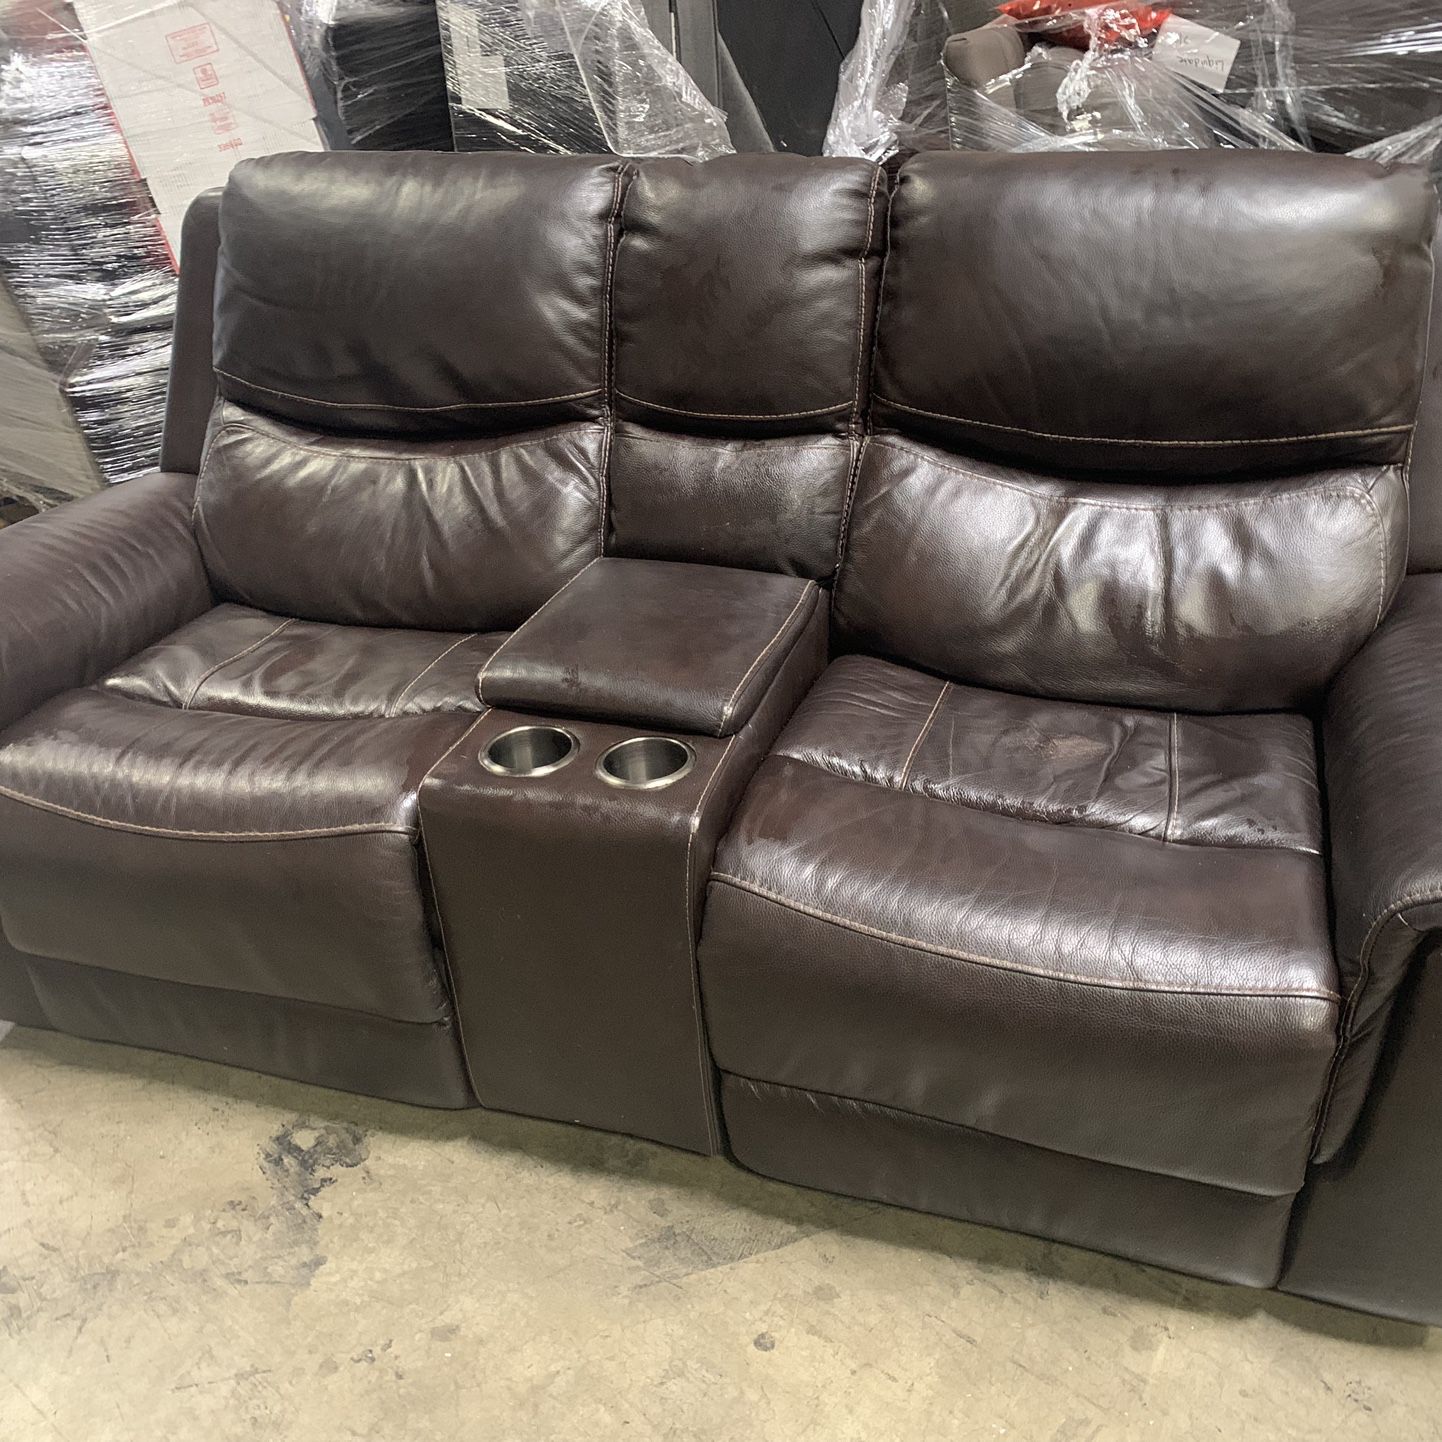 Power Loveseat With Recliner $100